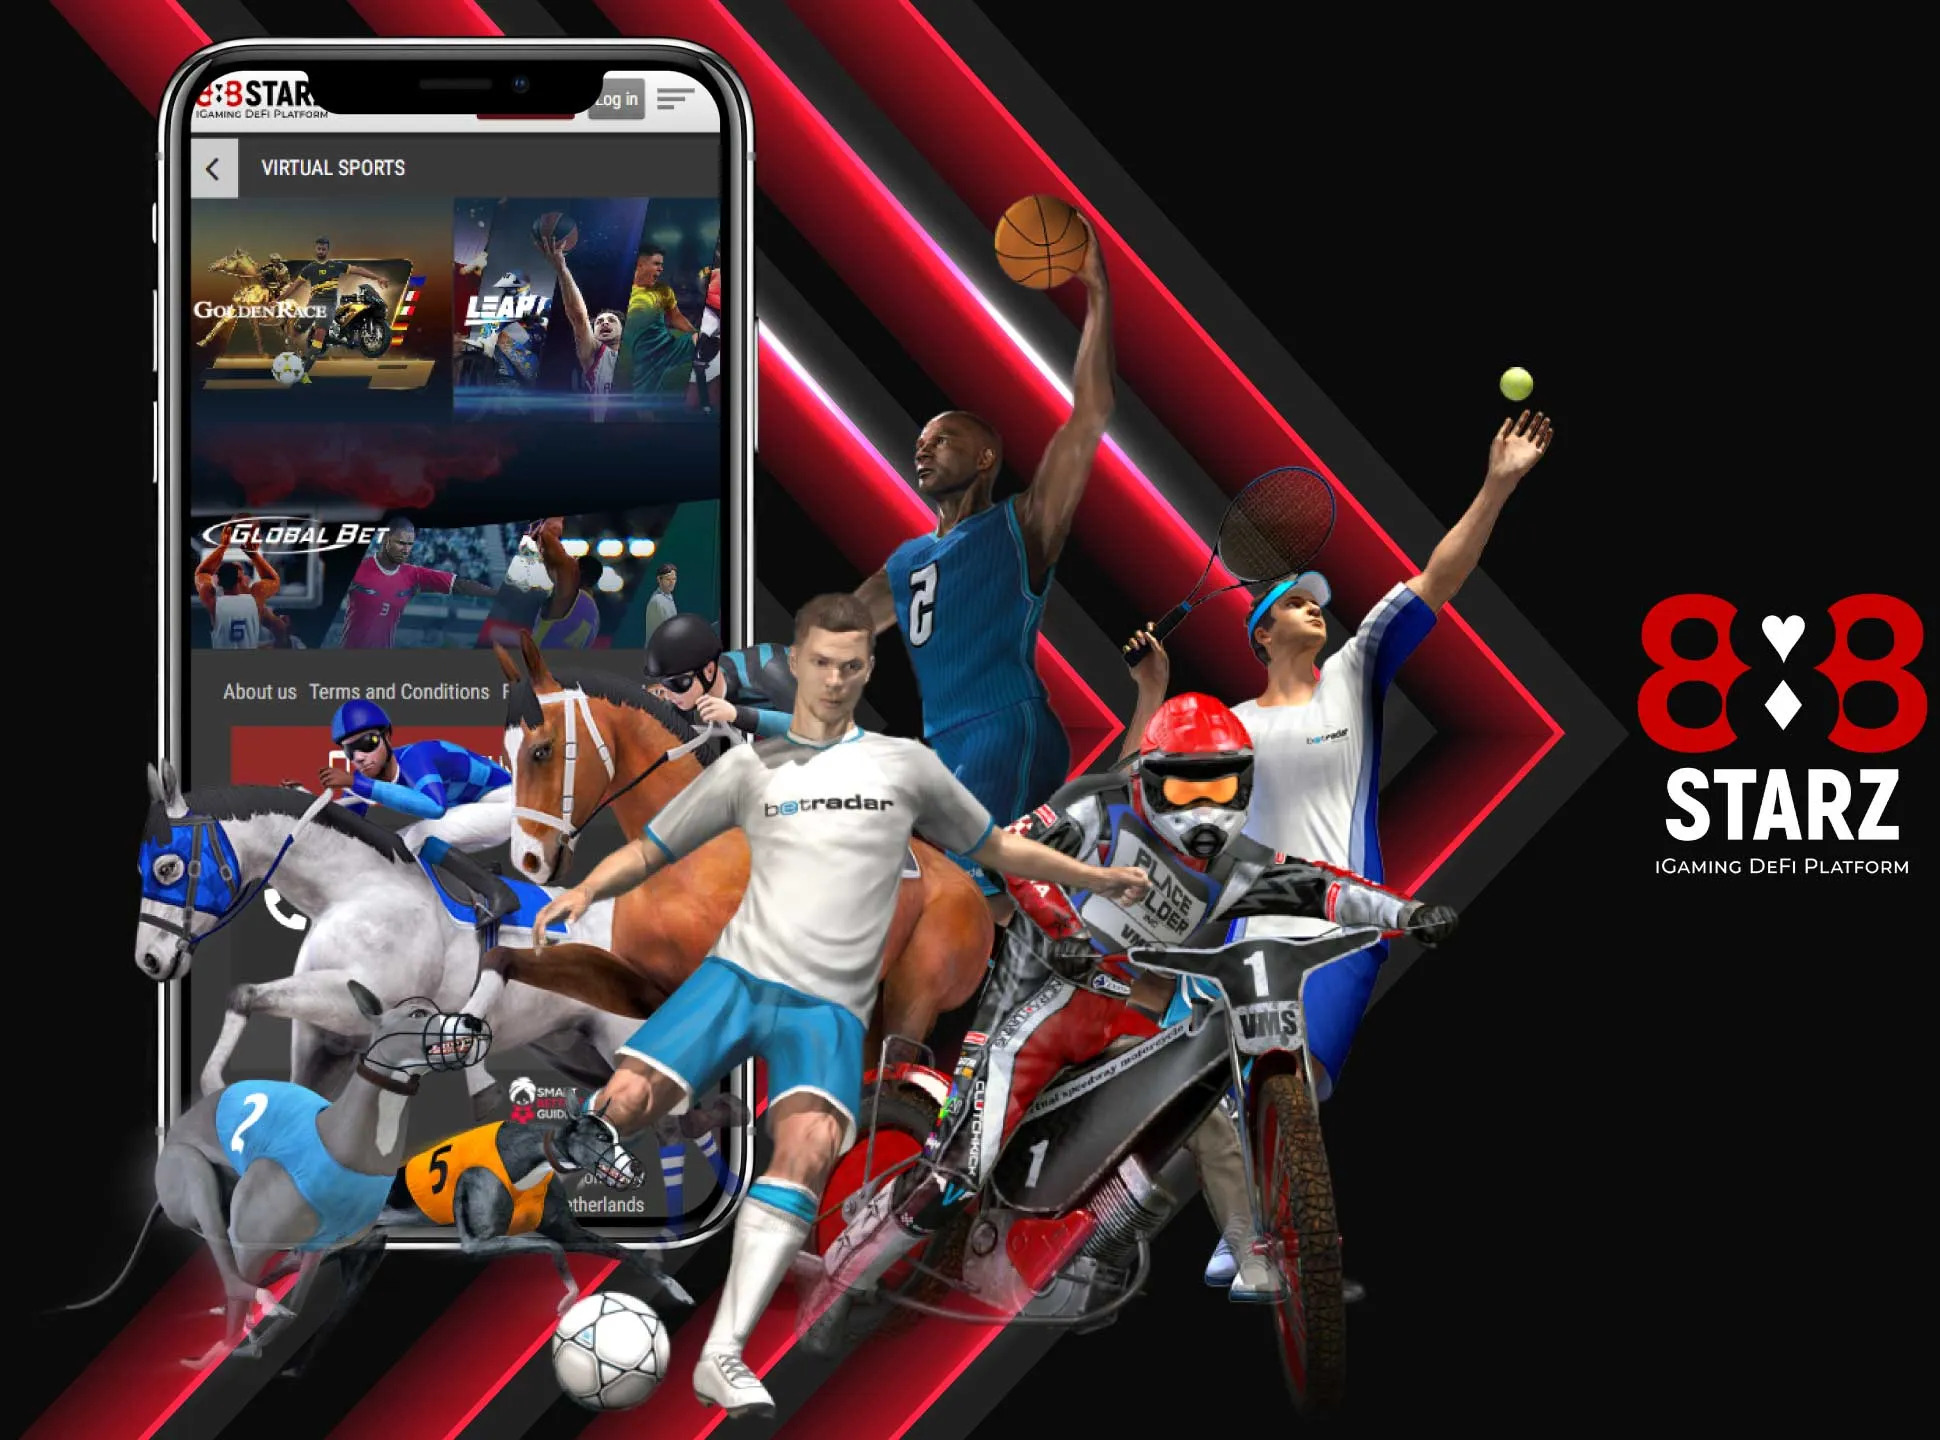 There are also many different virtual sports to bet on in the 888starz app.